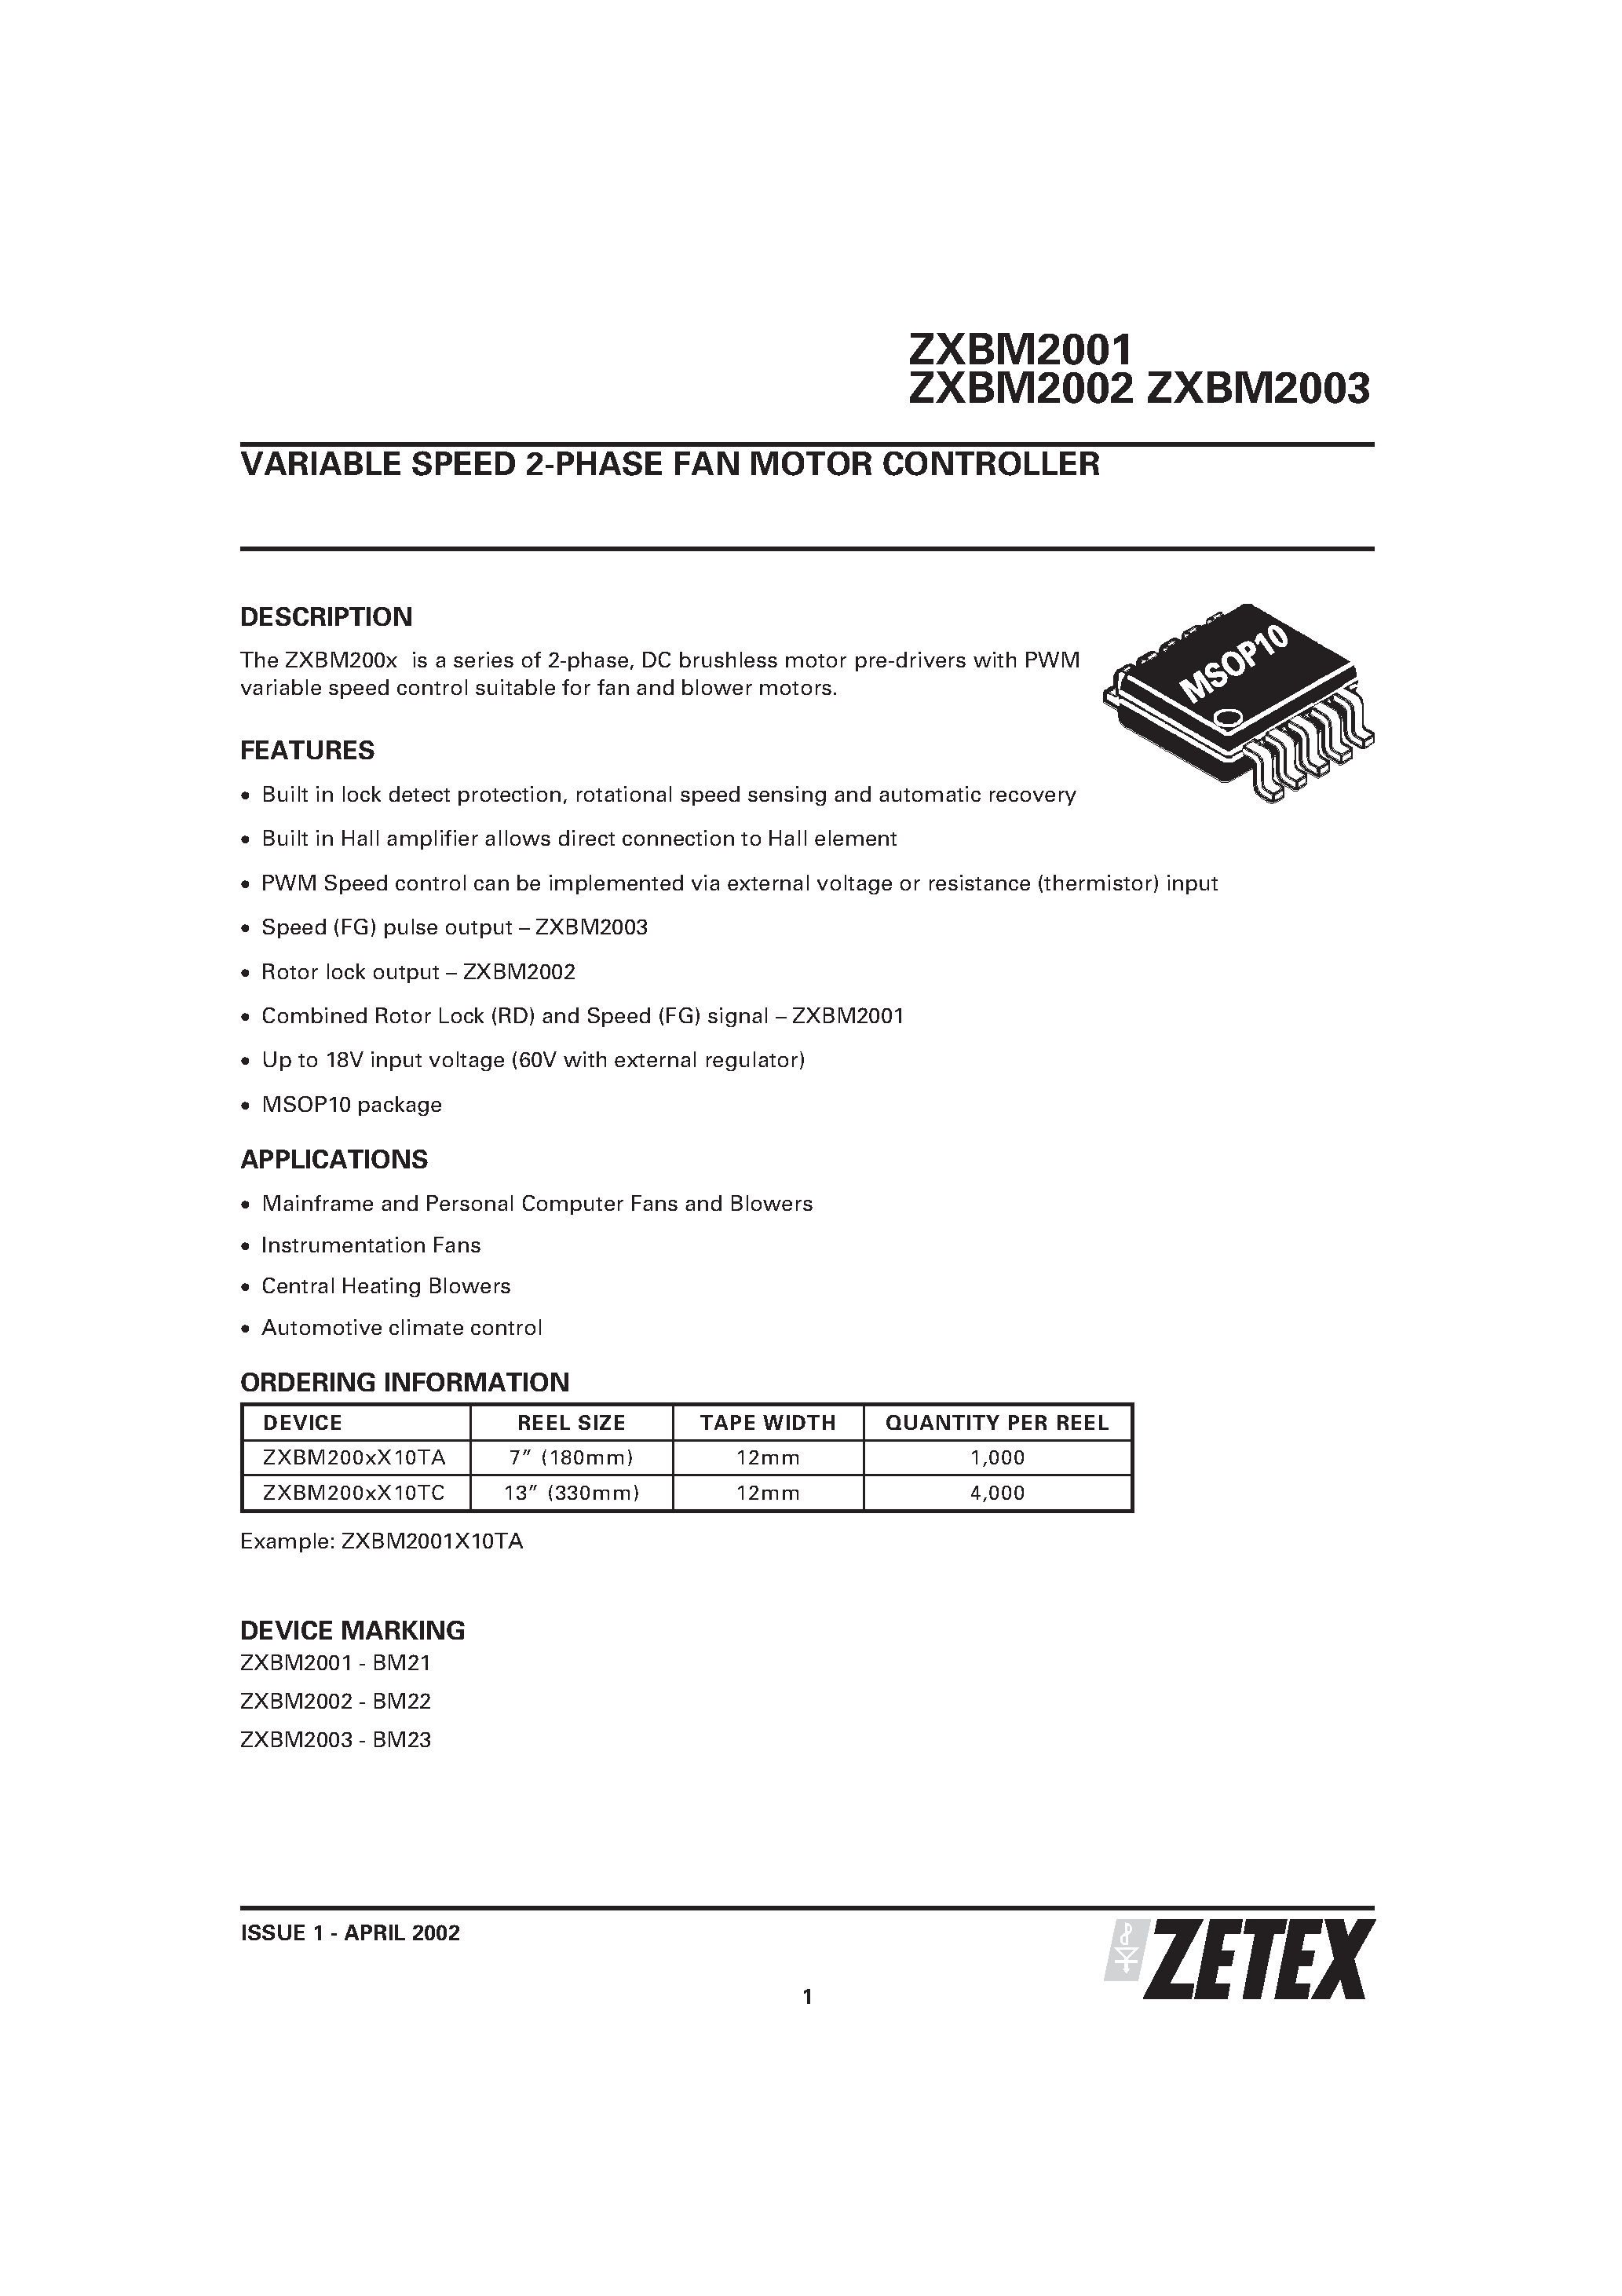 Datasheet ZXBM2001 - VARIABLE SPEED 2-PHASE FAN MOTOR CONTROLLER page 1